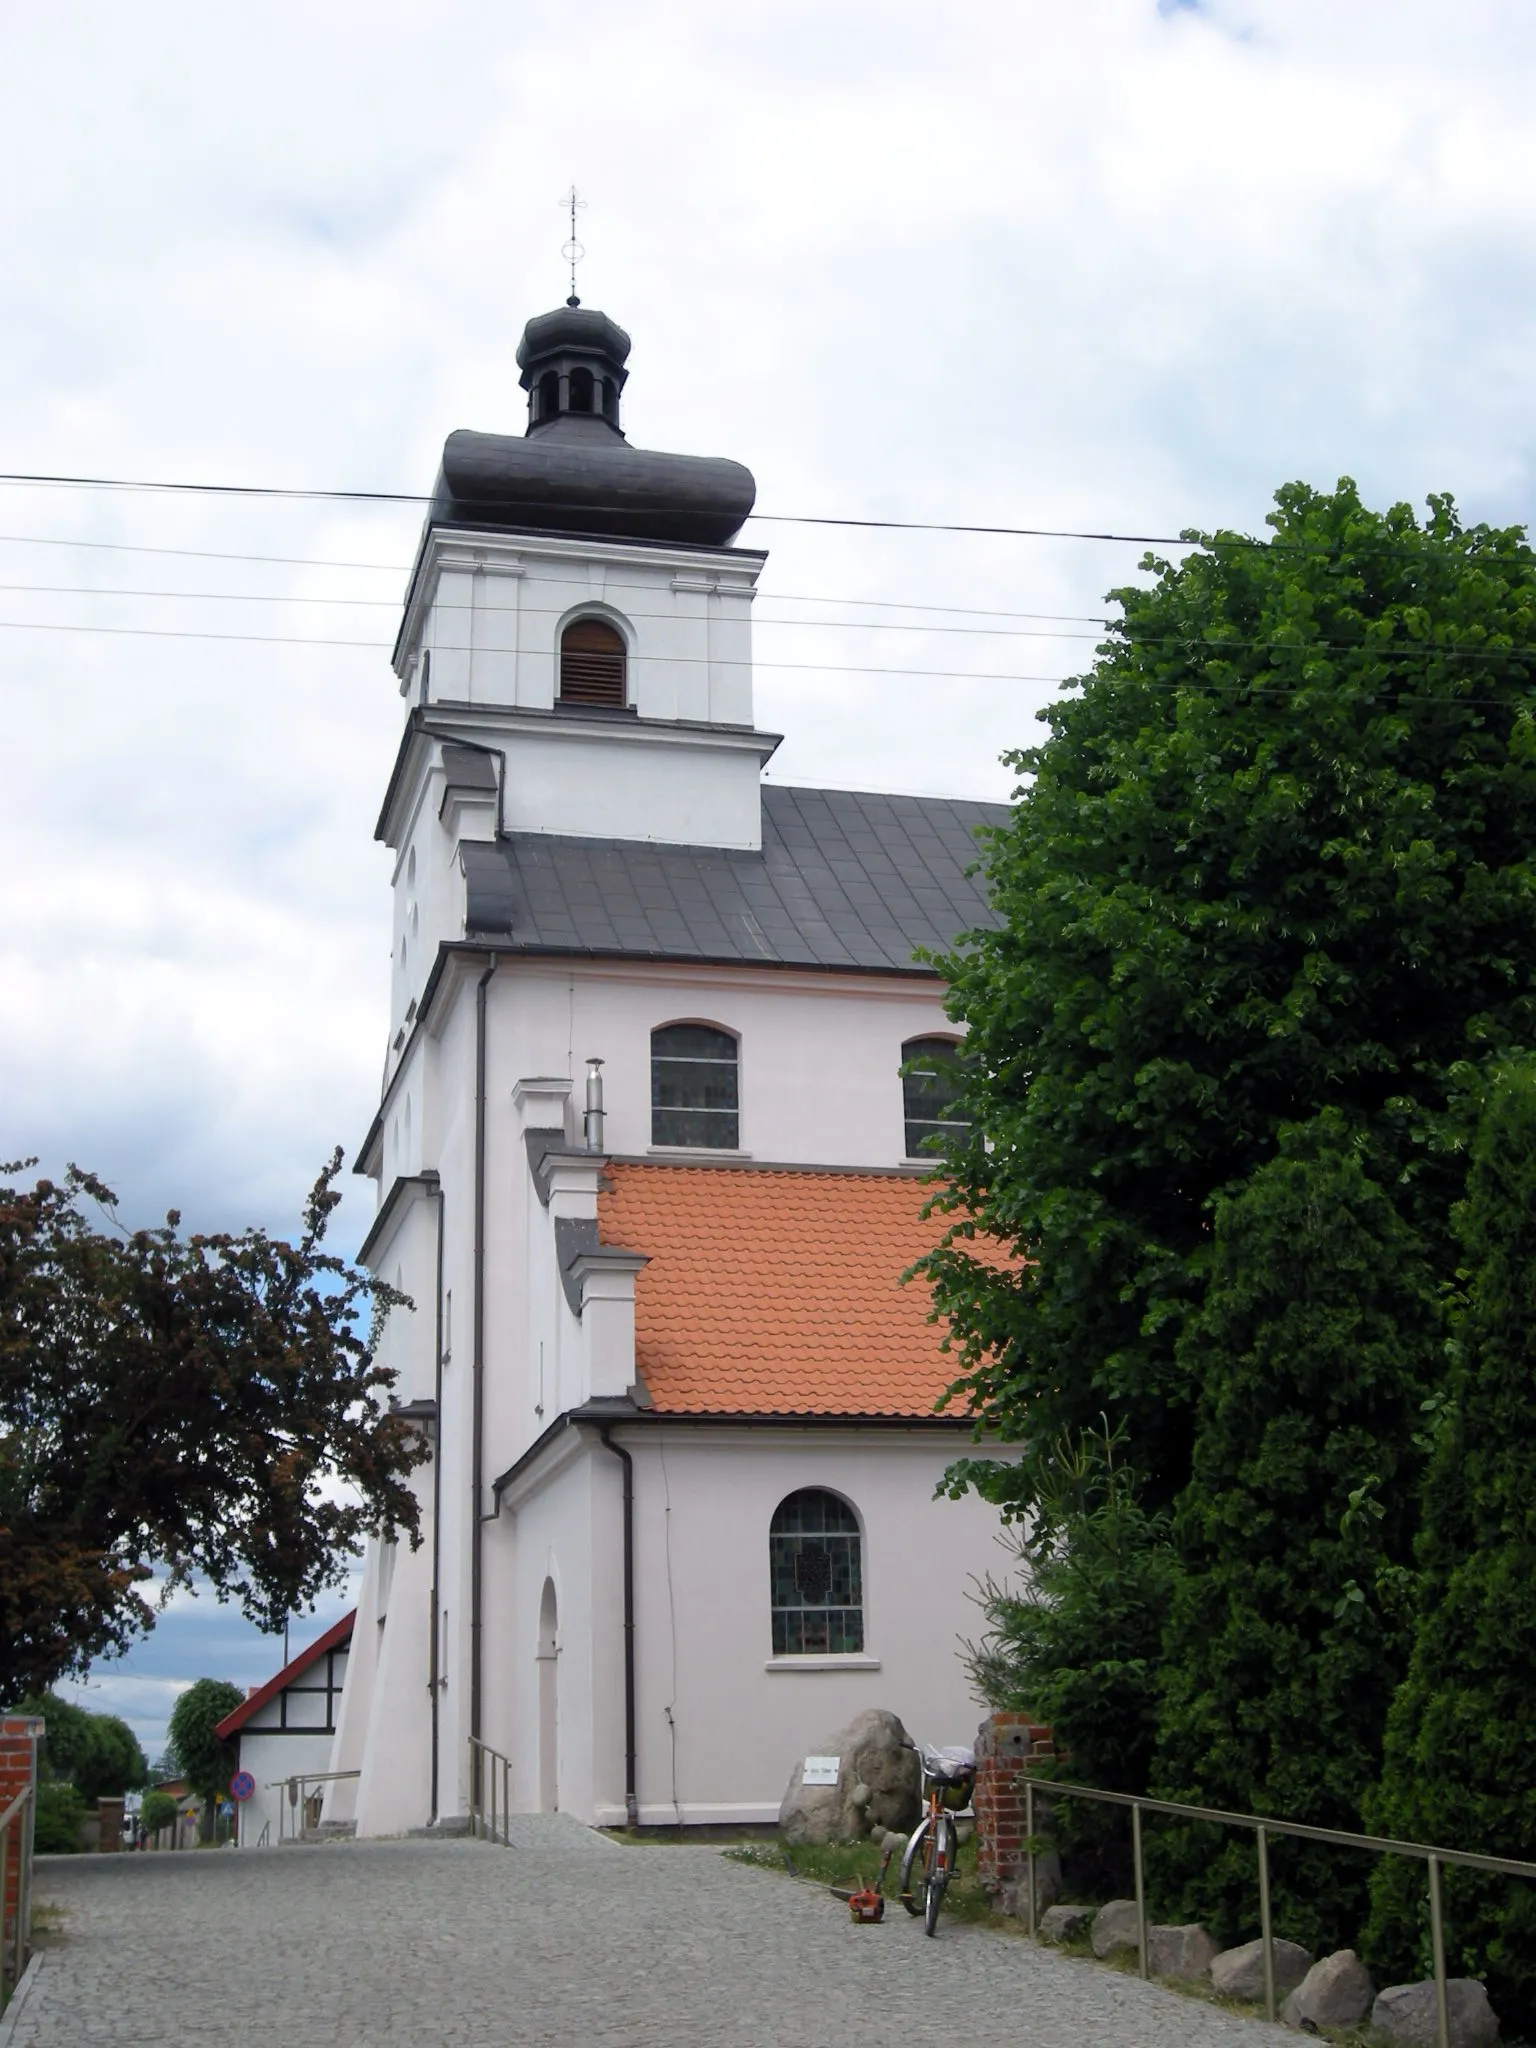 Photo showing: The church in Jeżewo, Poland.